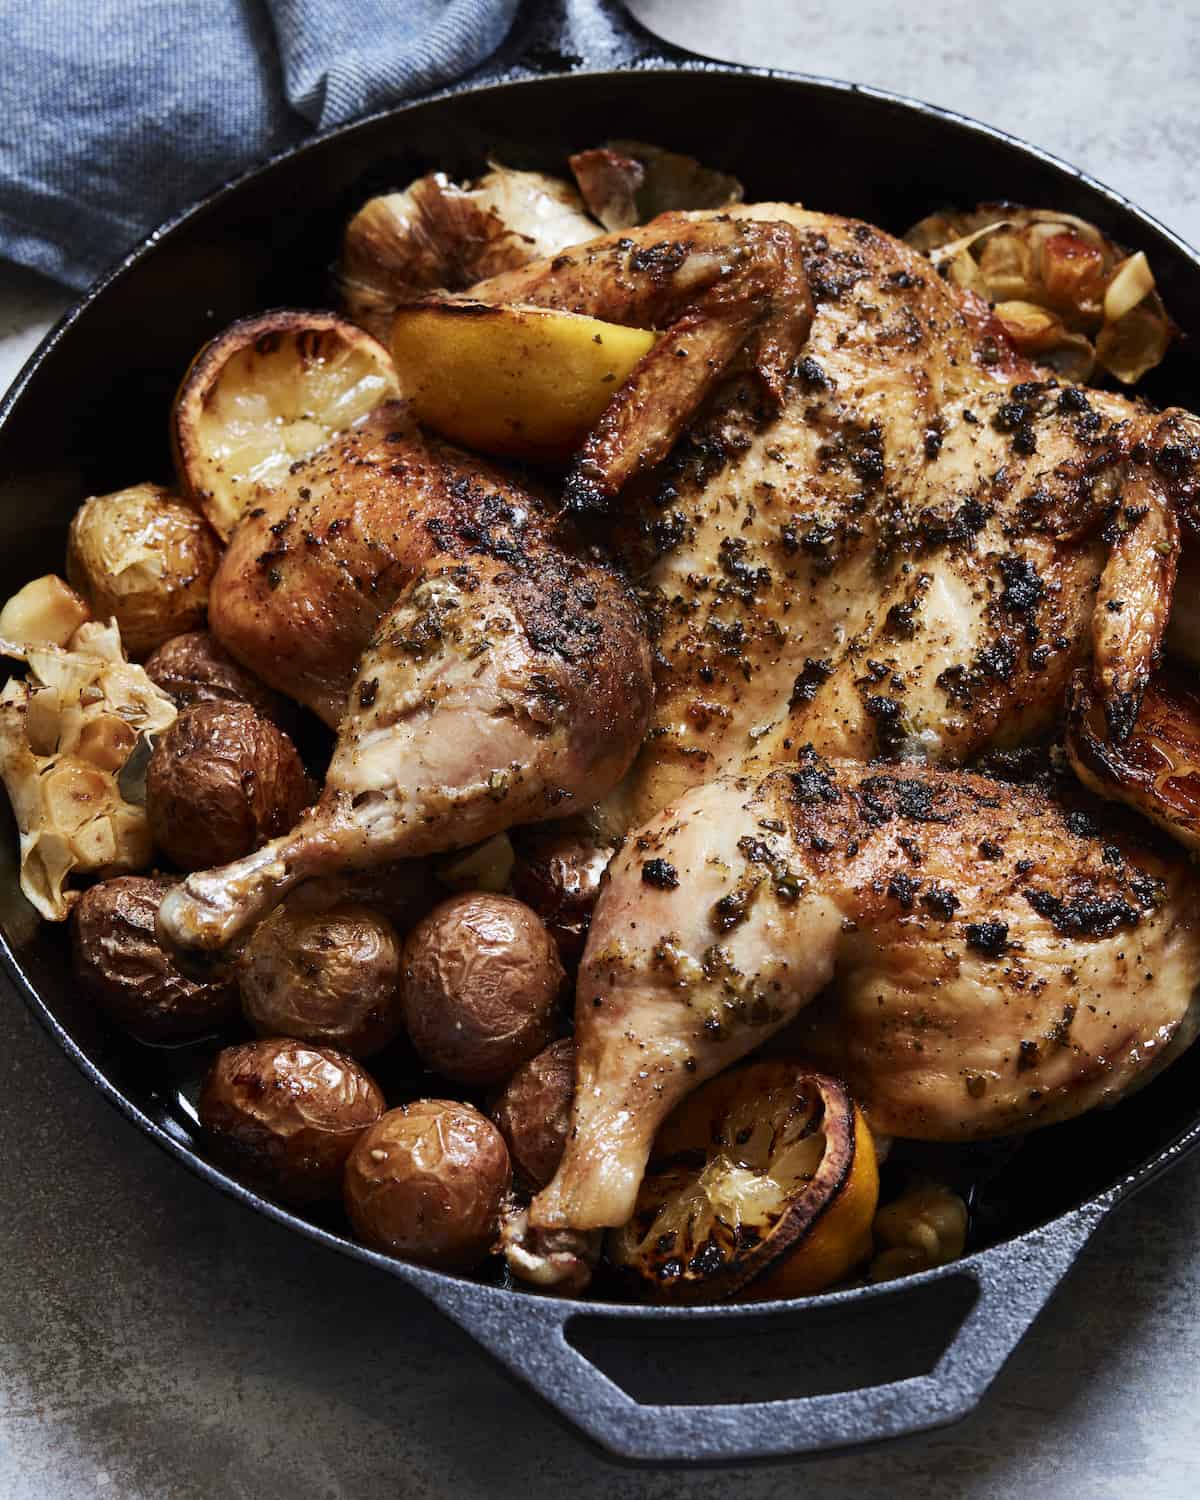 A skillet closeup, with a roasted spatchcock chicken on a bed of lemon halves and baby potatoes on a blue kitchen towel.